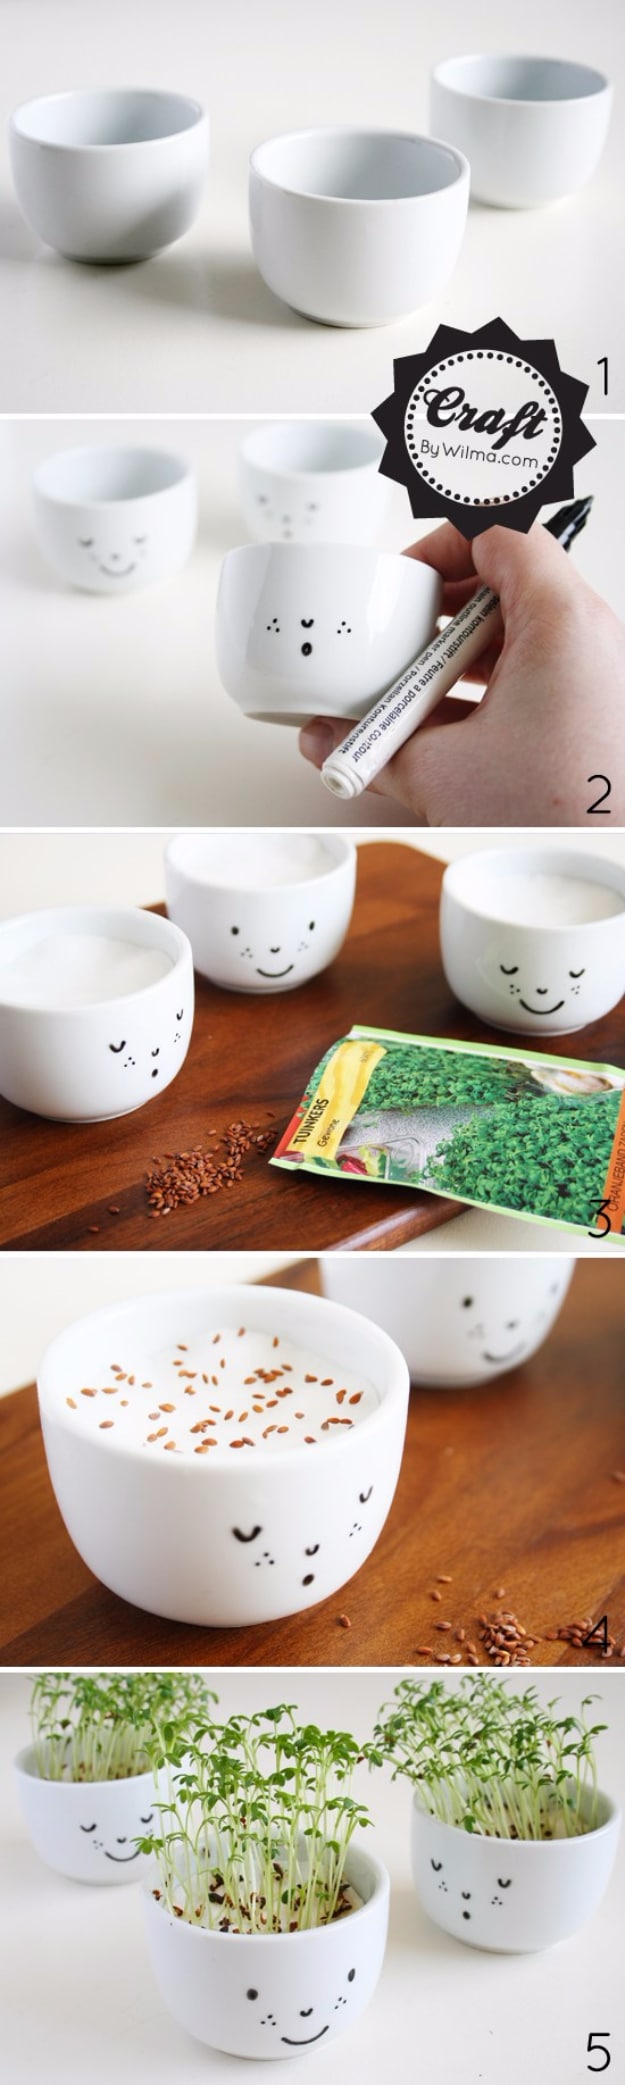 DIY Sharpie Crafts - DIY Cress Cups WIth A Face - Cool and Easy Craft Projects and DIY Ideas Using Sharpies - Use Markers To Decorate and Design Home Decor, Cool Homemade Gifts, T-Shirts, Shoes and Wall Art. Creative Project Tutorials for Teens, Kids and Adults #sharpiecrafts #diyideas #cheapcrafts